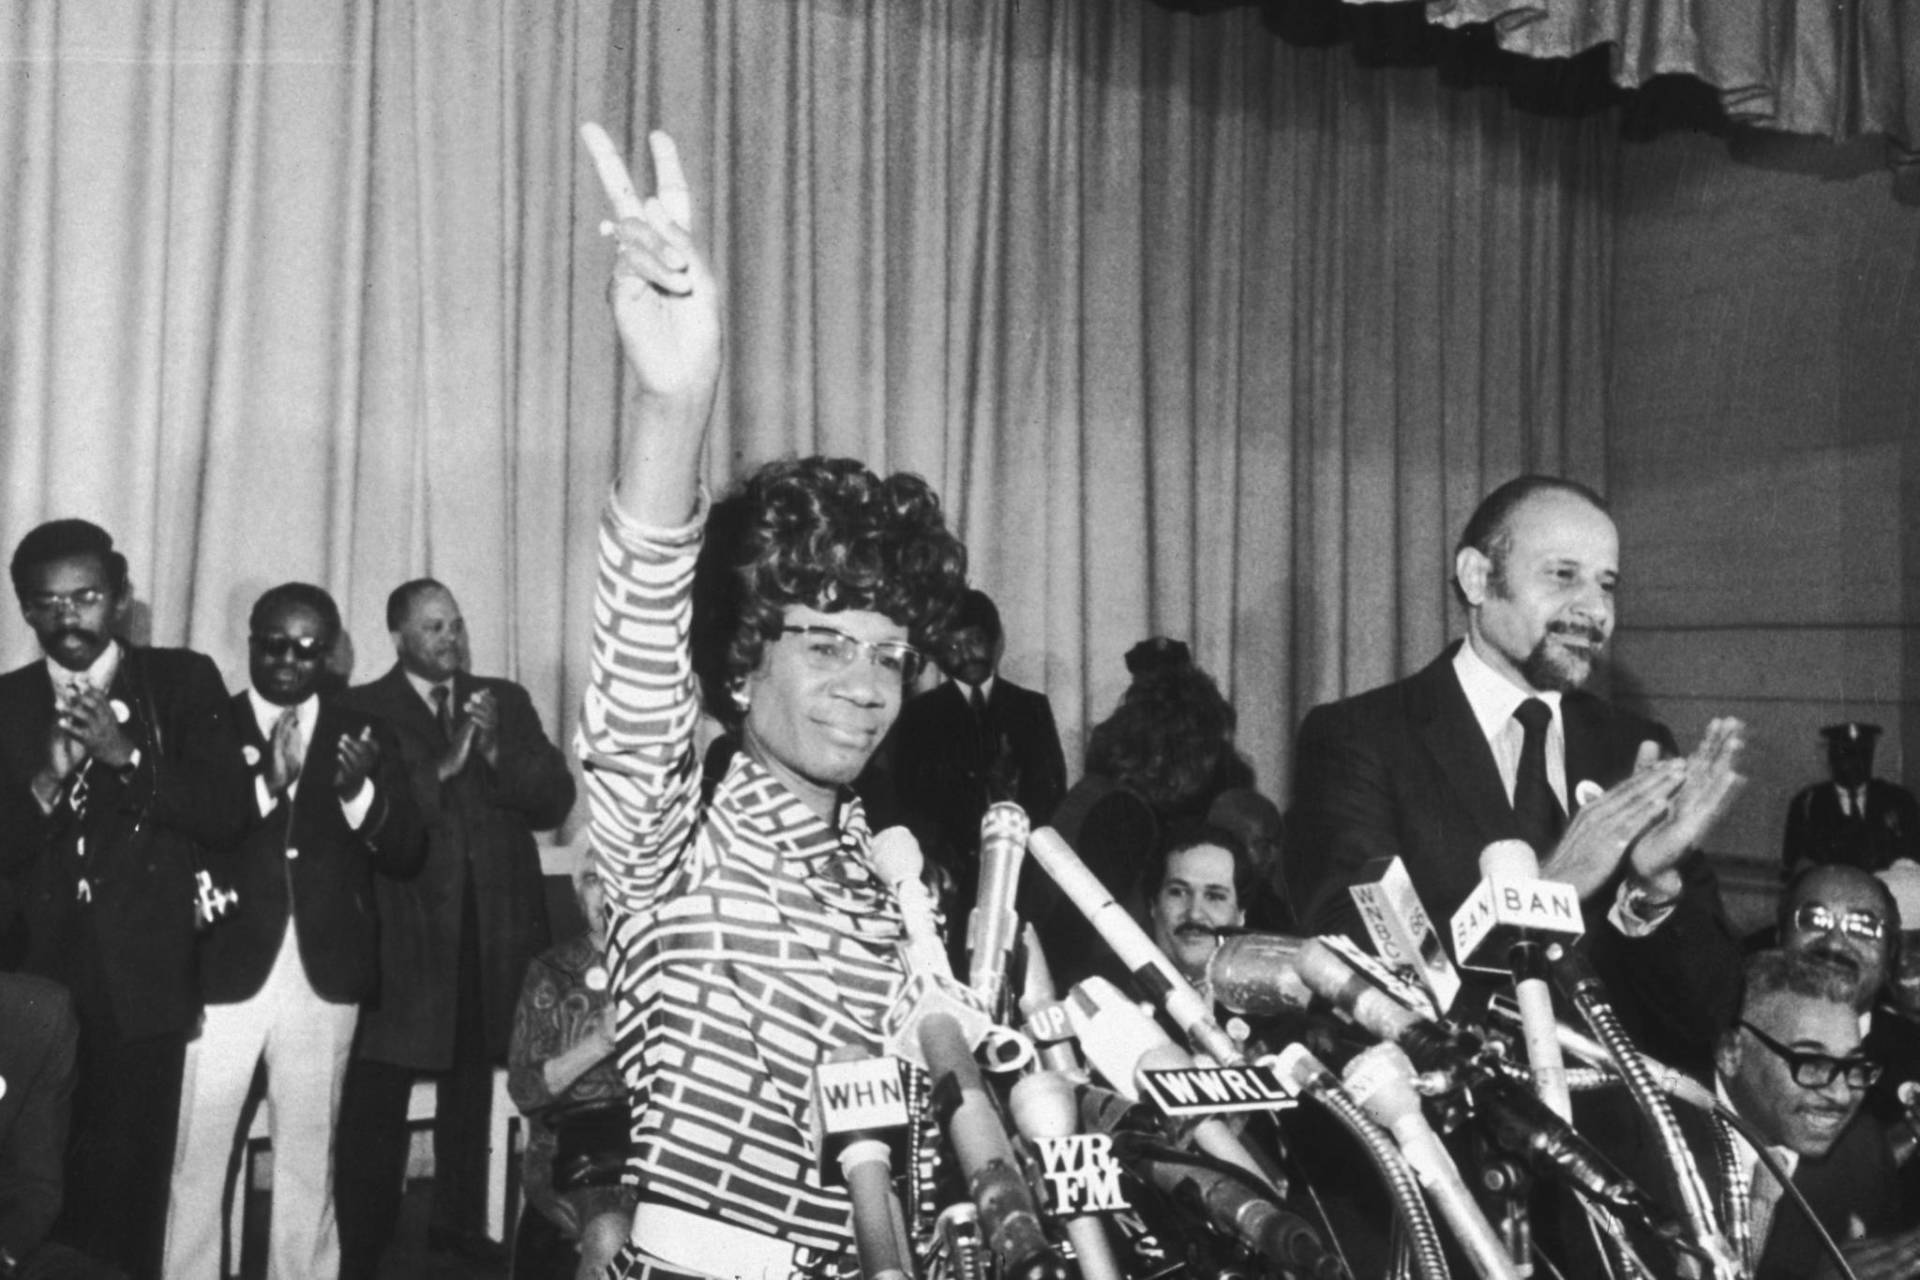 New York City says it will erect a statue of Shirley Chisholm, the first black woman elected to Congress. Chisholm is seen here in a Brooklyn church in January 1972, announcing her bid for the Democratic nomination for president. Don Hogan Charles/Getty Images